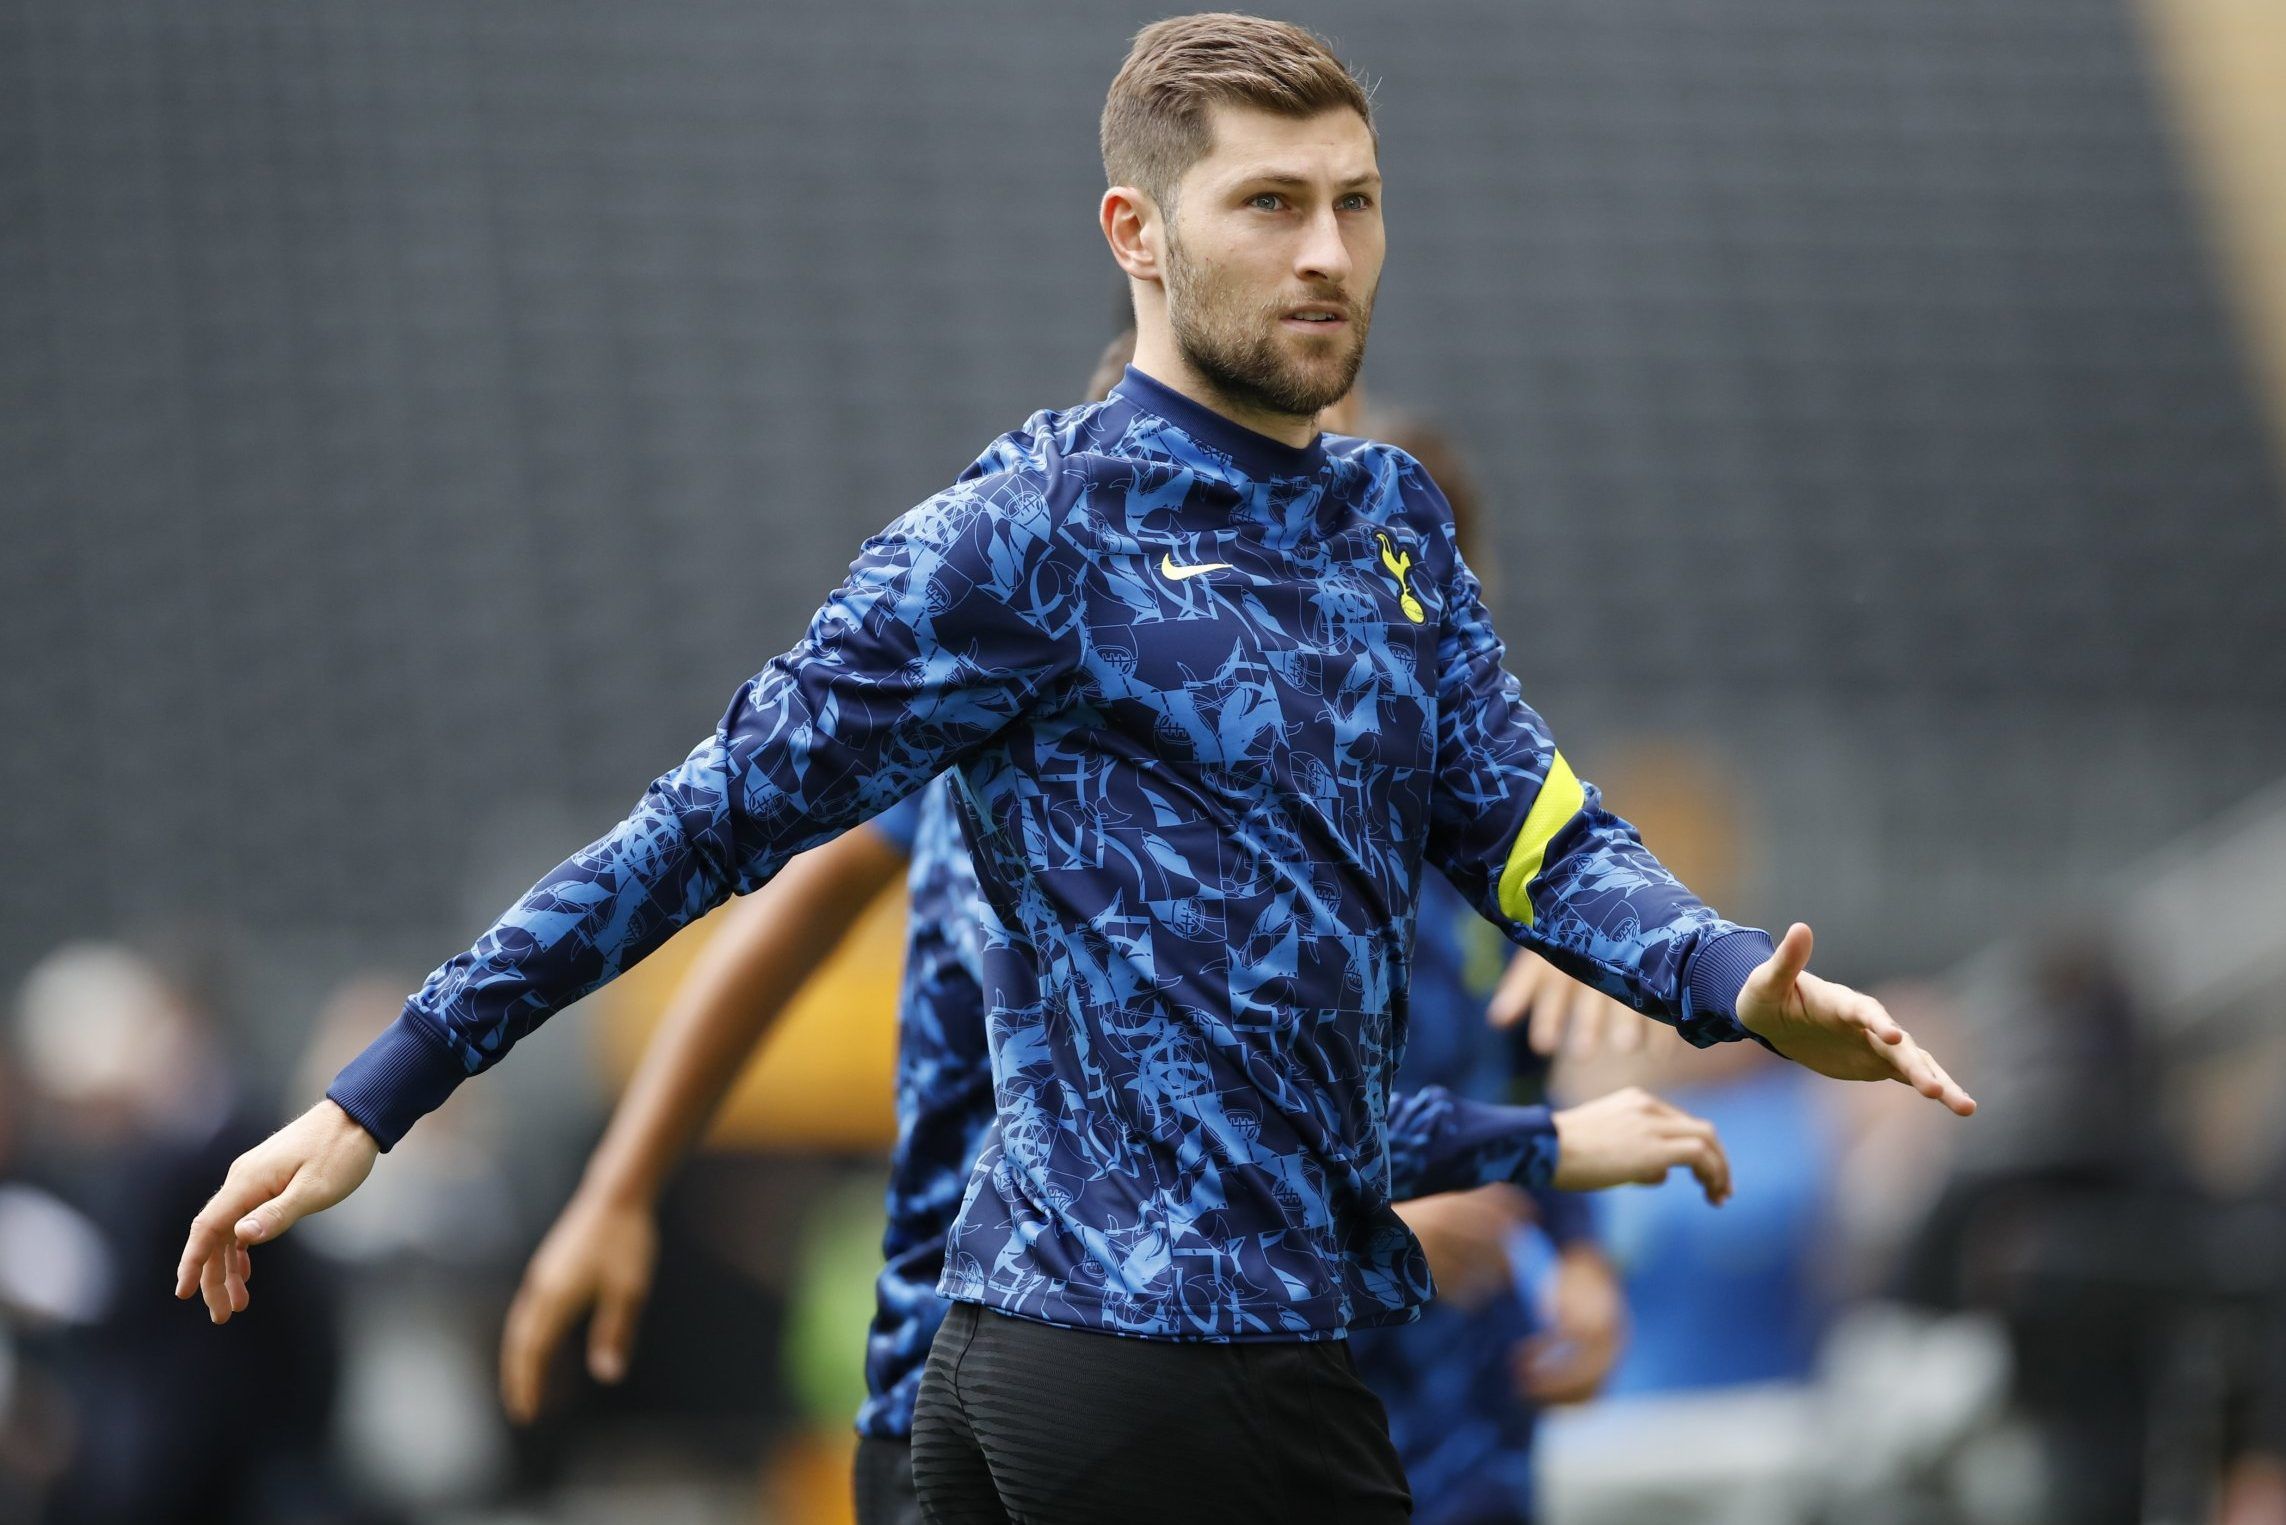 Spurs defender Ben Davies looks on during warm up prior to Wolves clash